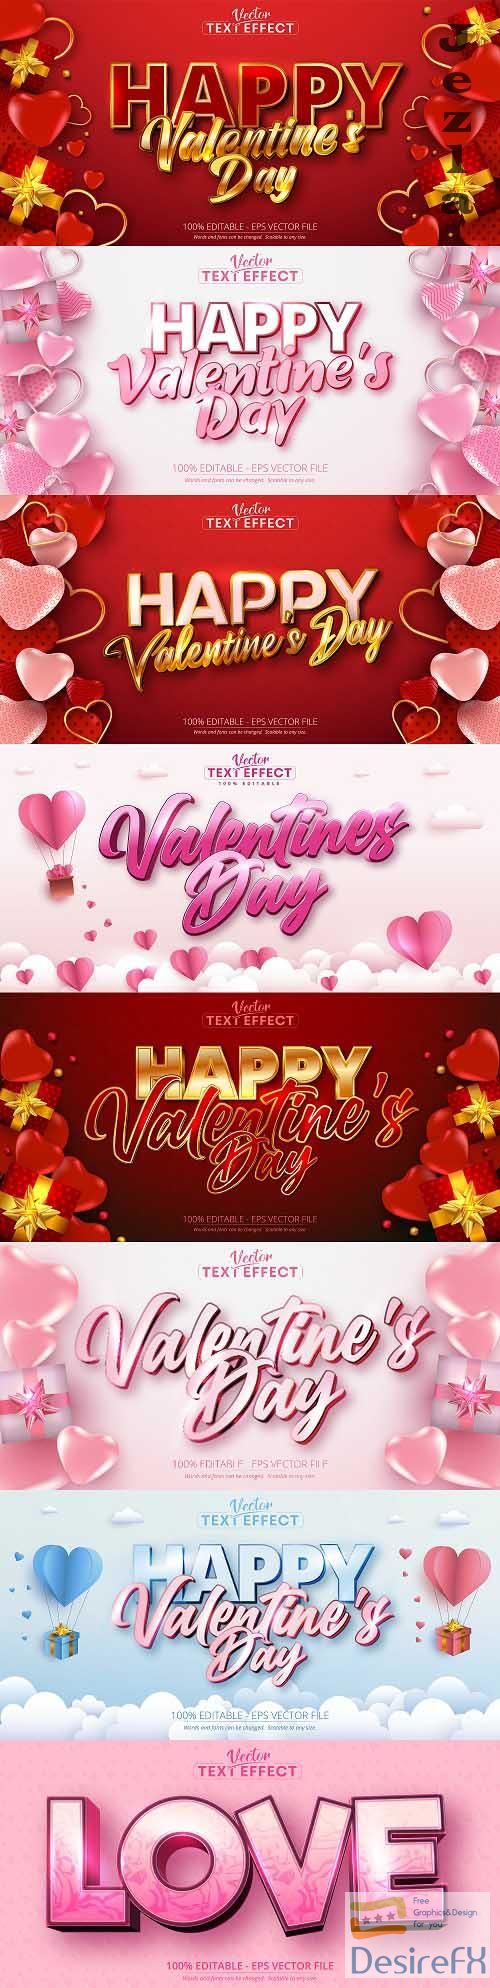 Editable font effect text collection illustration design 244 - Valentine's Day